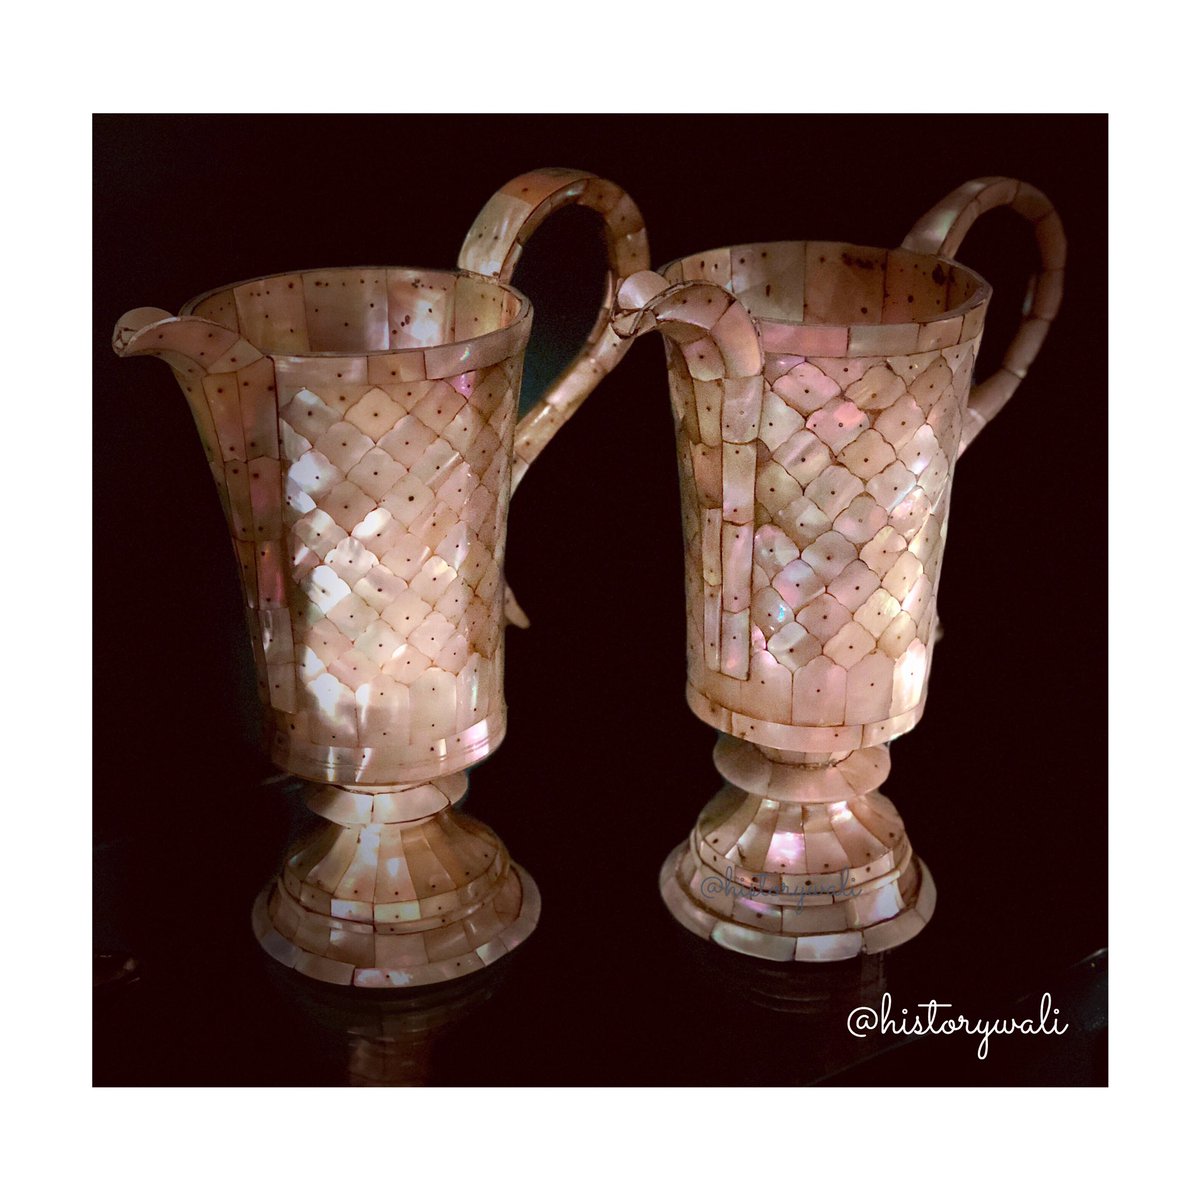 Not from a shoot but I found these beauties at the British Museum in London. Mother of Pearl cups from 17th Century CE Gujarat. Made for European collectors, the label says.